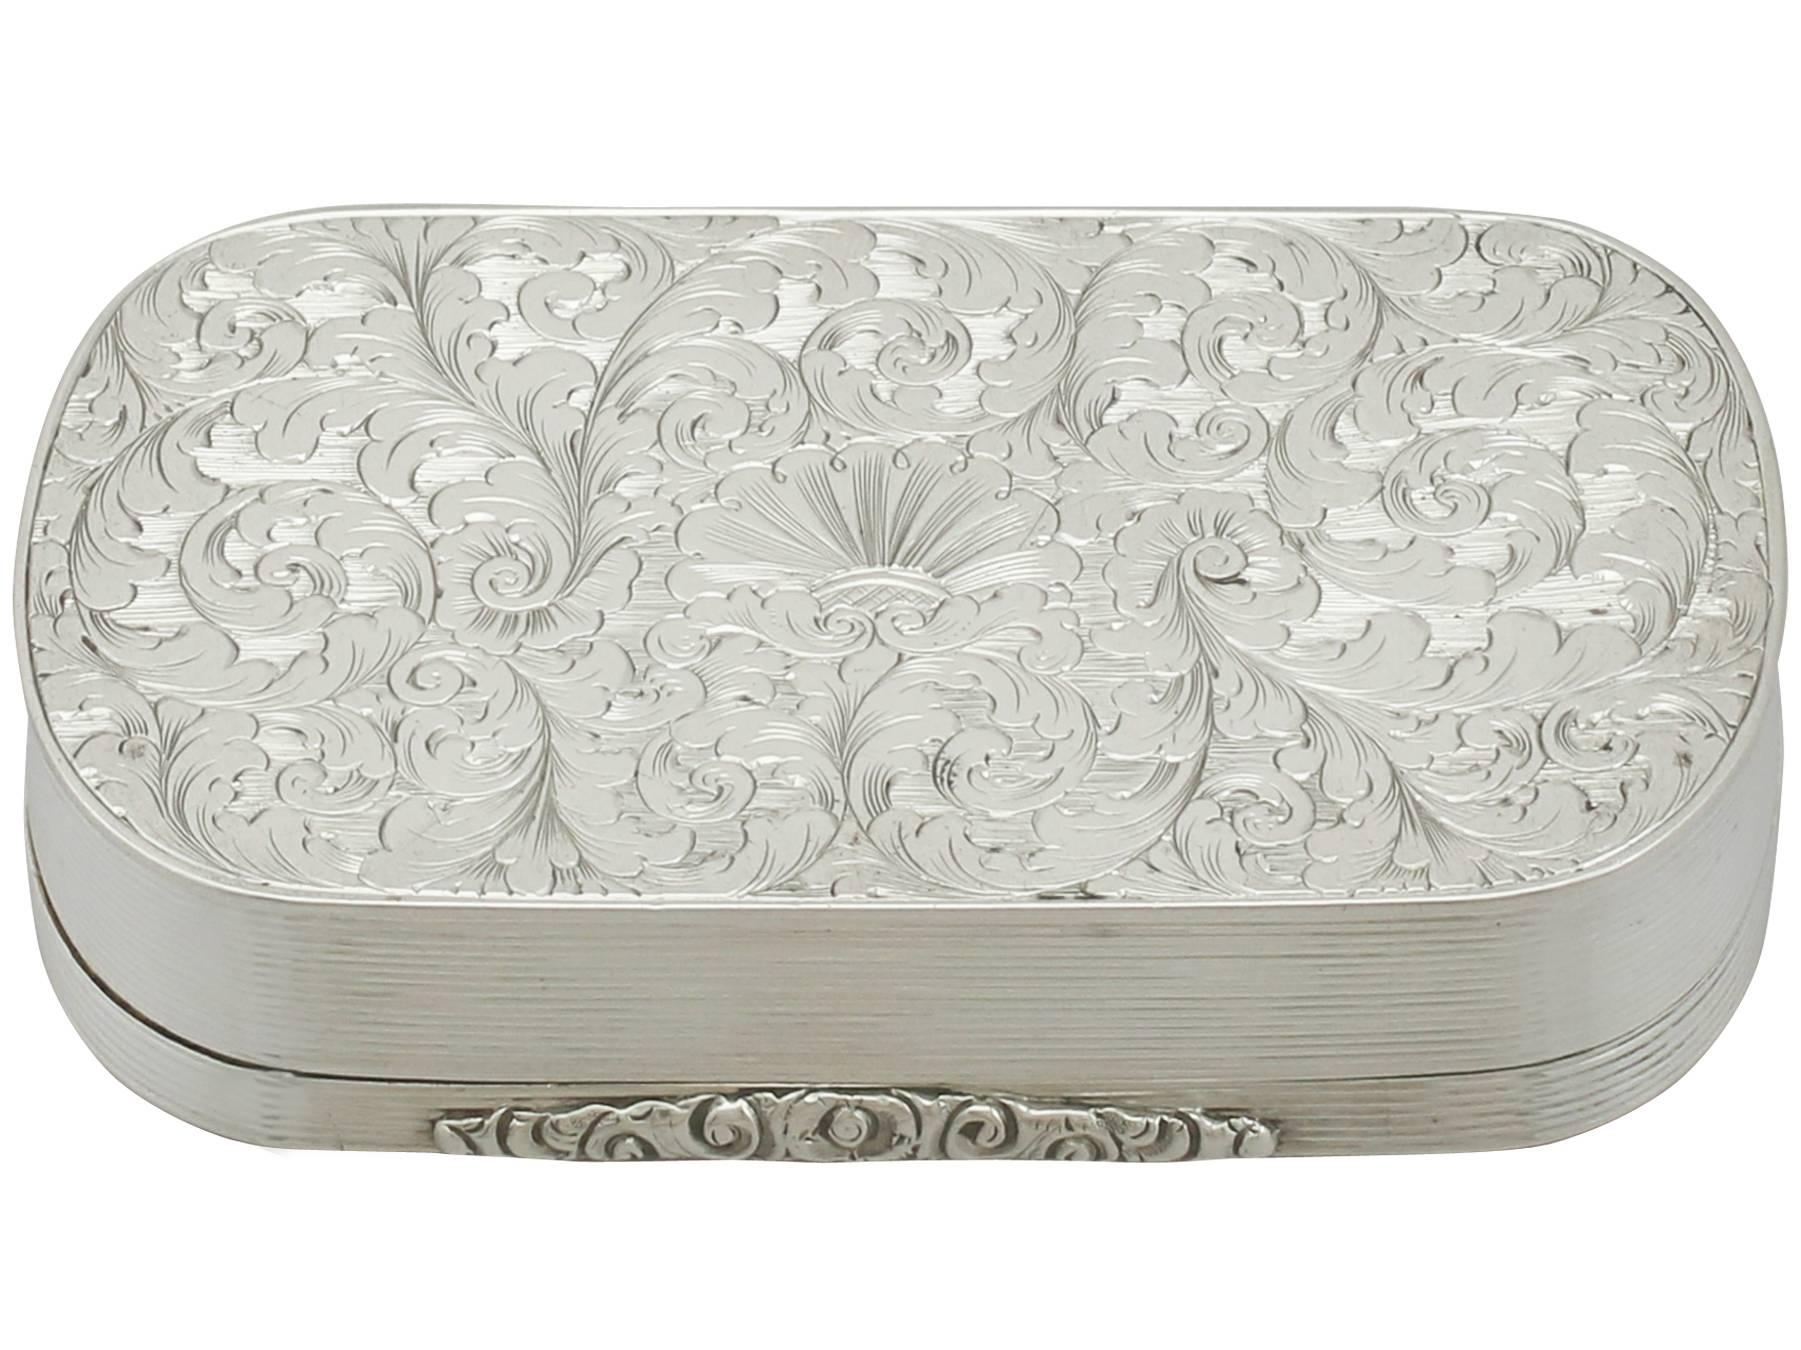 An exceptional, fine and impressive antique Victorian English sterling silver table snuff box; an addition to our collectable silverware collection.

This exceptional antique Victorian sterling silver snuff box has a rectangular form with rounded